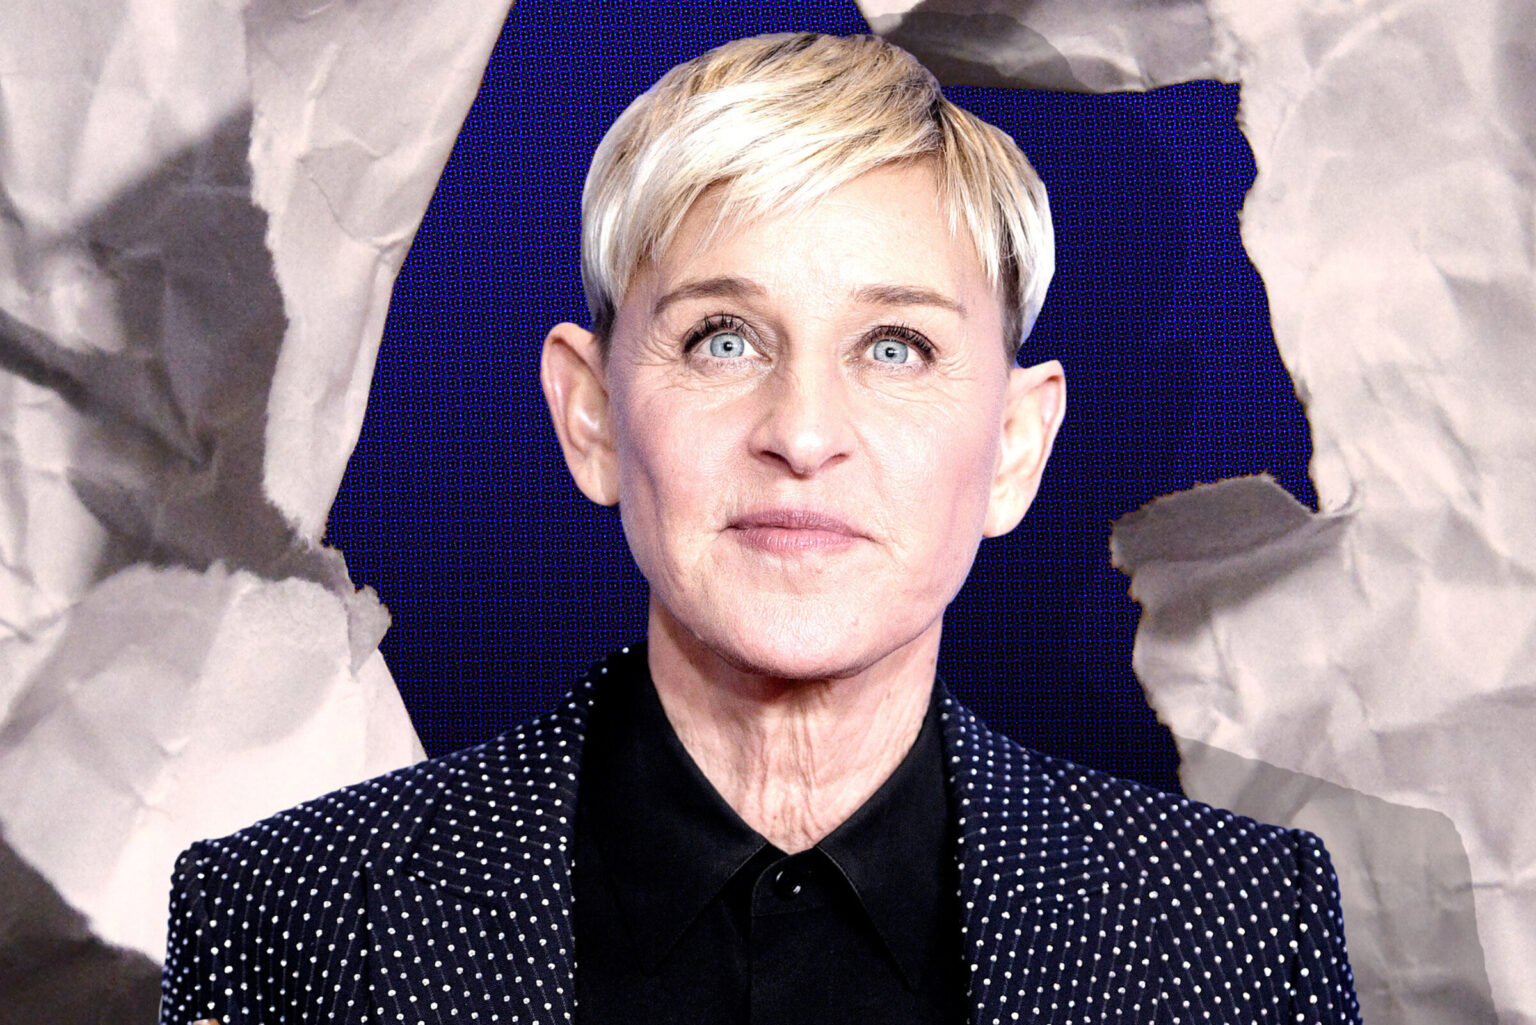 Still want tickets to 'The Ellen DeGeneres Show'? Maybe you should hold off. Let's find out if staff are being forced to keep quiet.